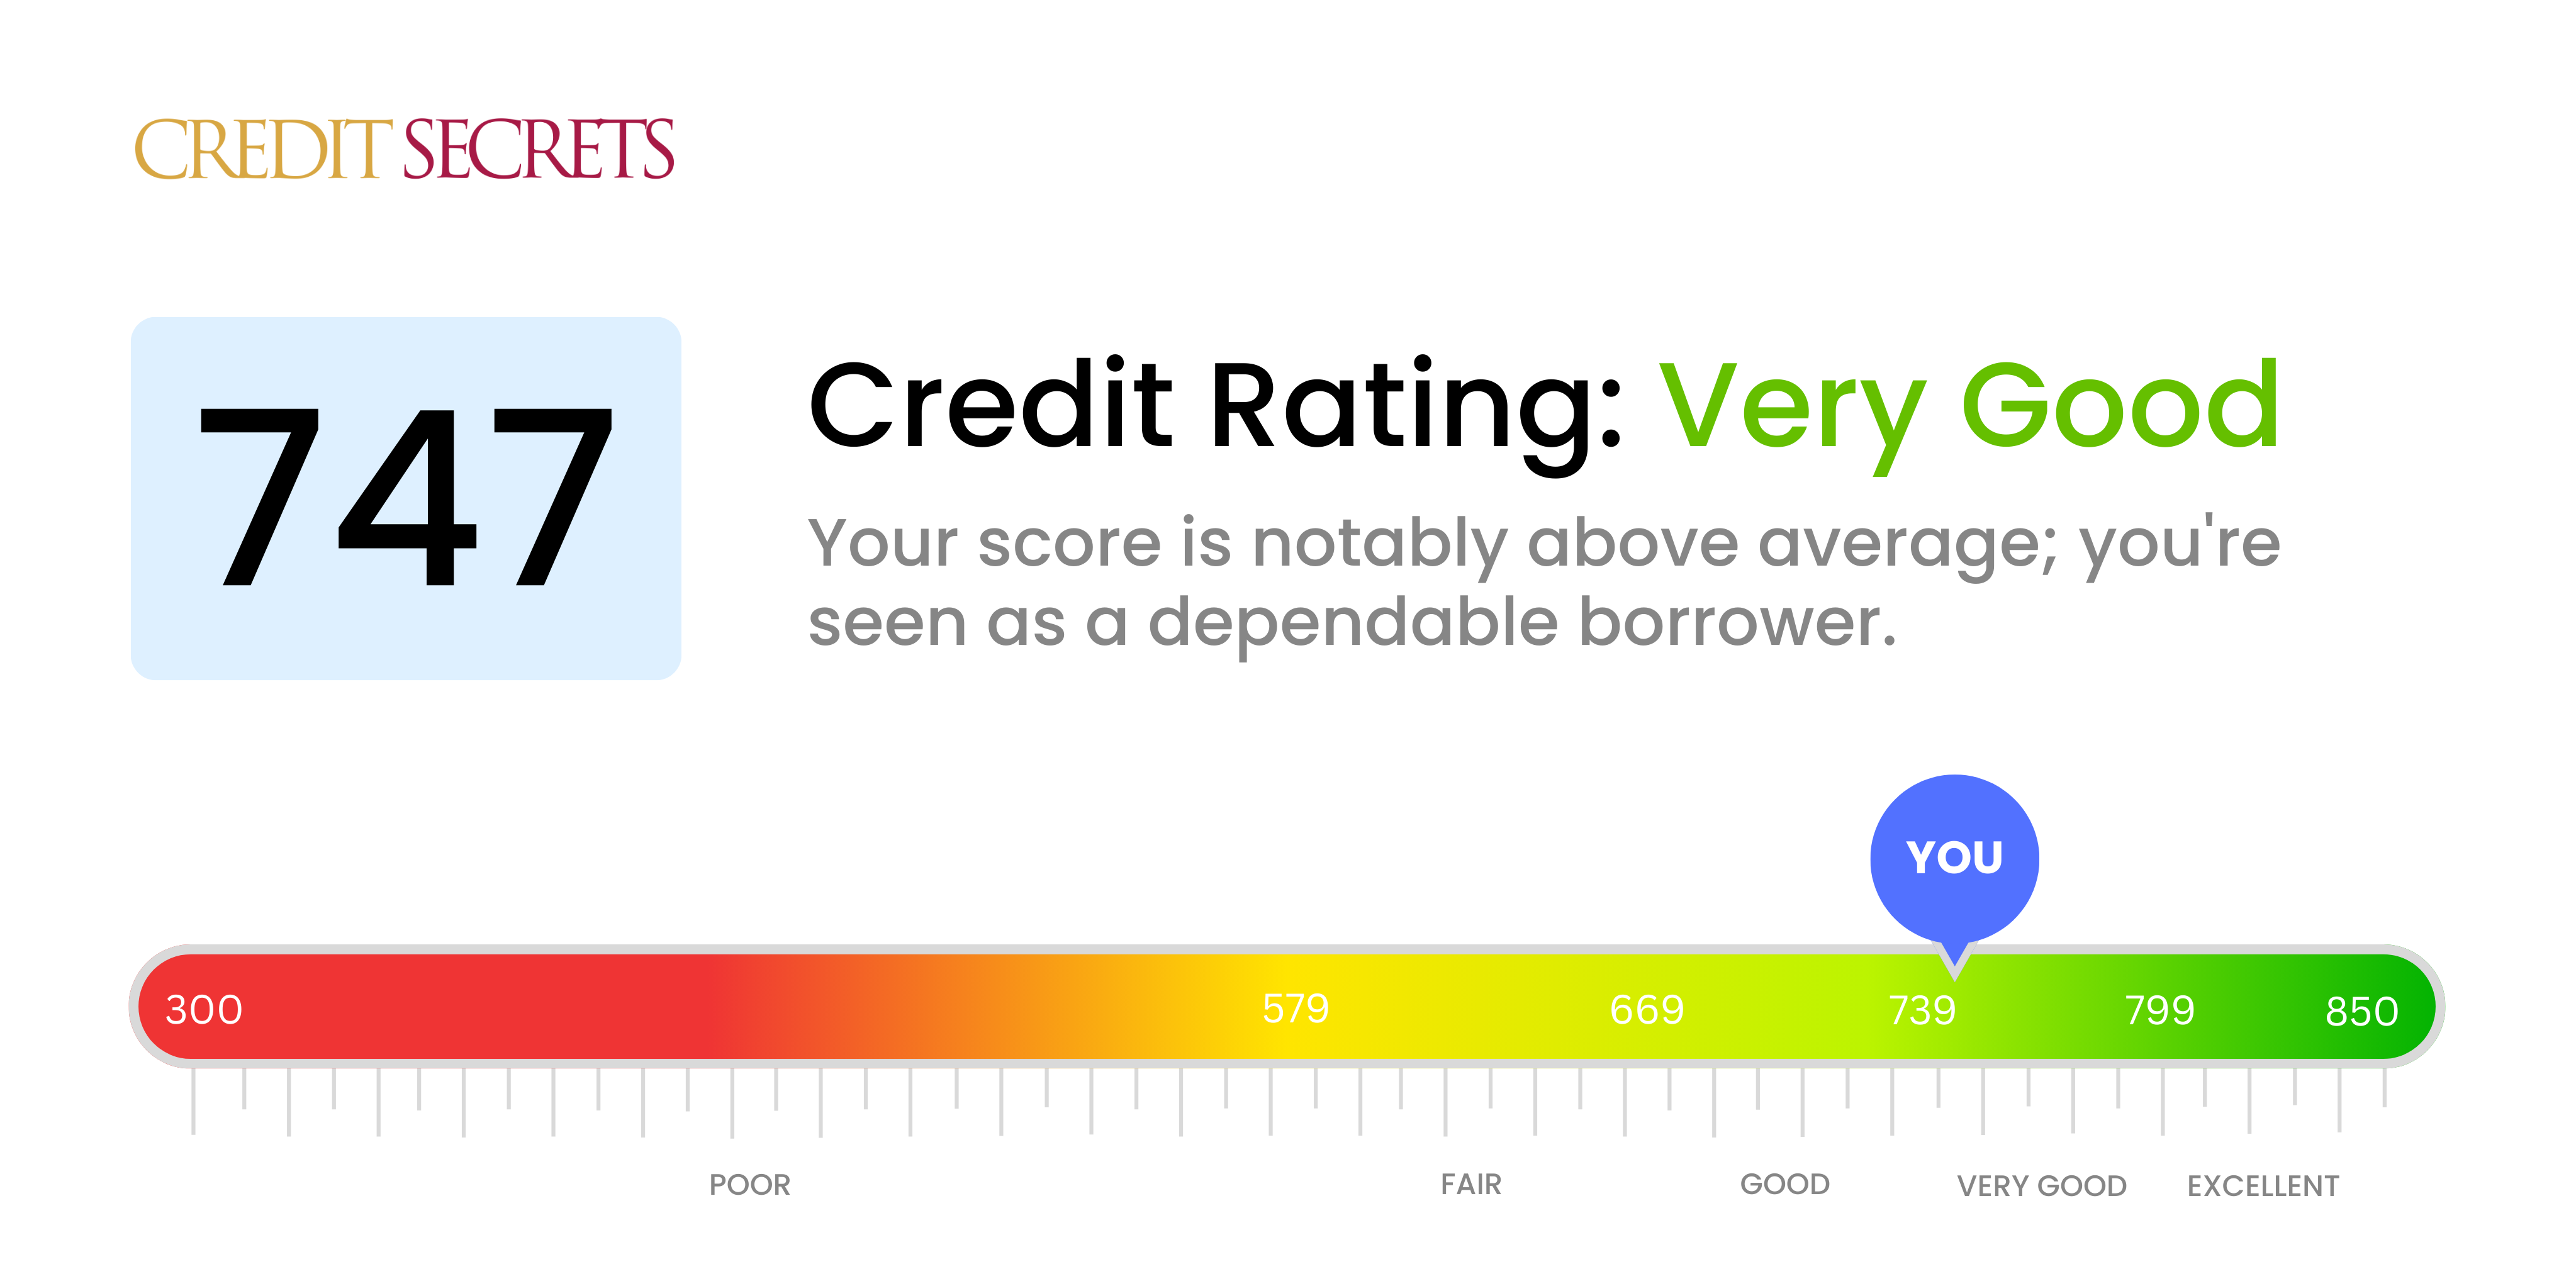 Is 747 a good credit score?